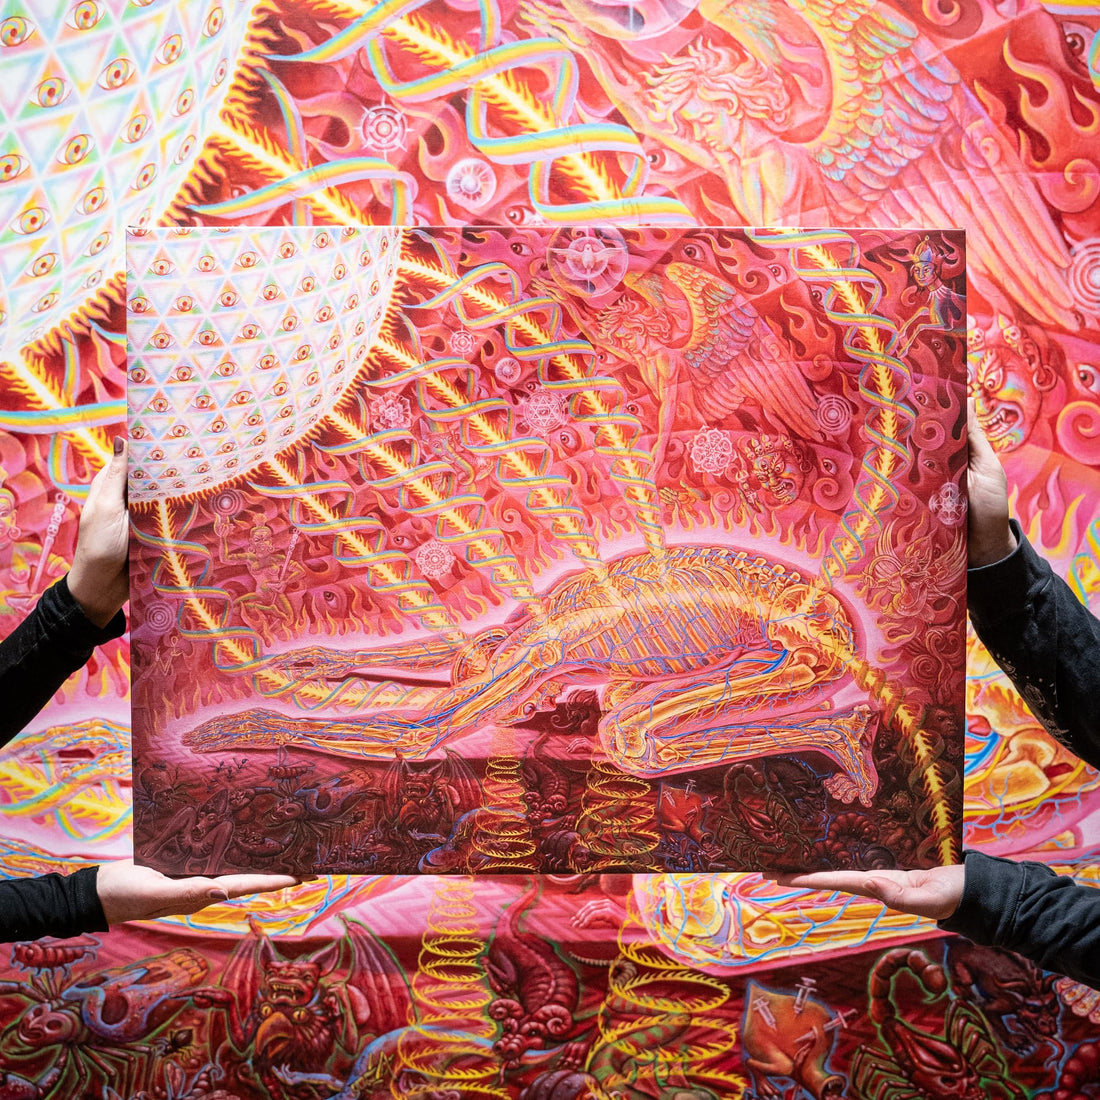 Never Before Released Artwork - Prostration by Alex Grey